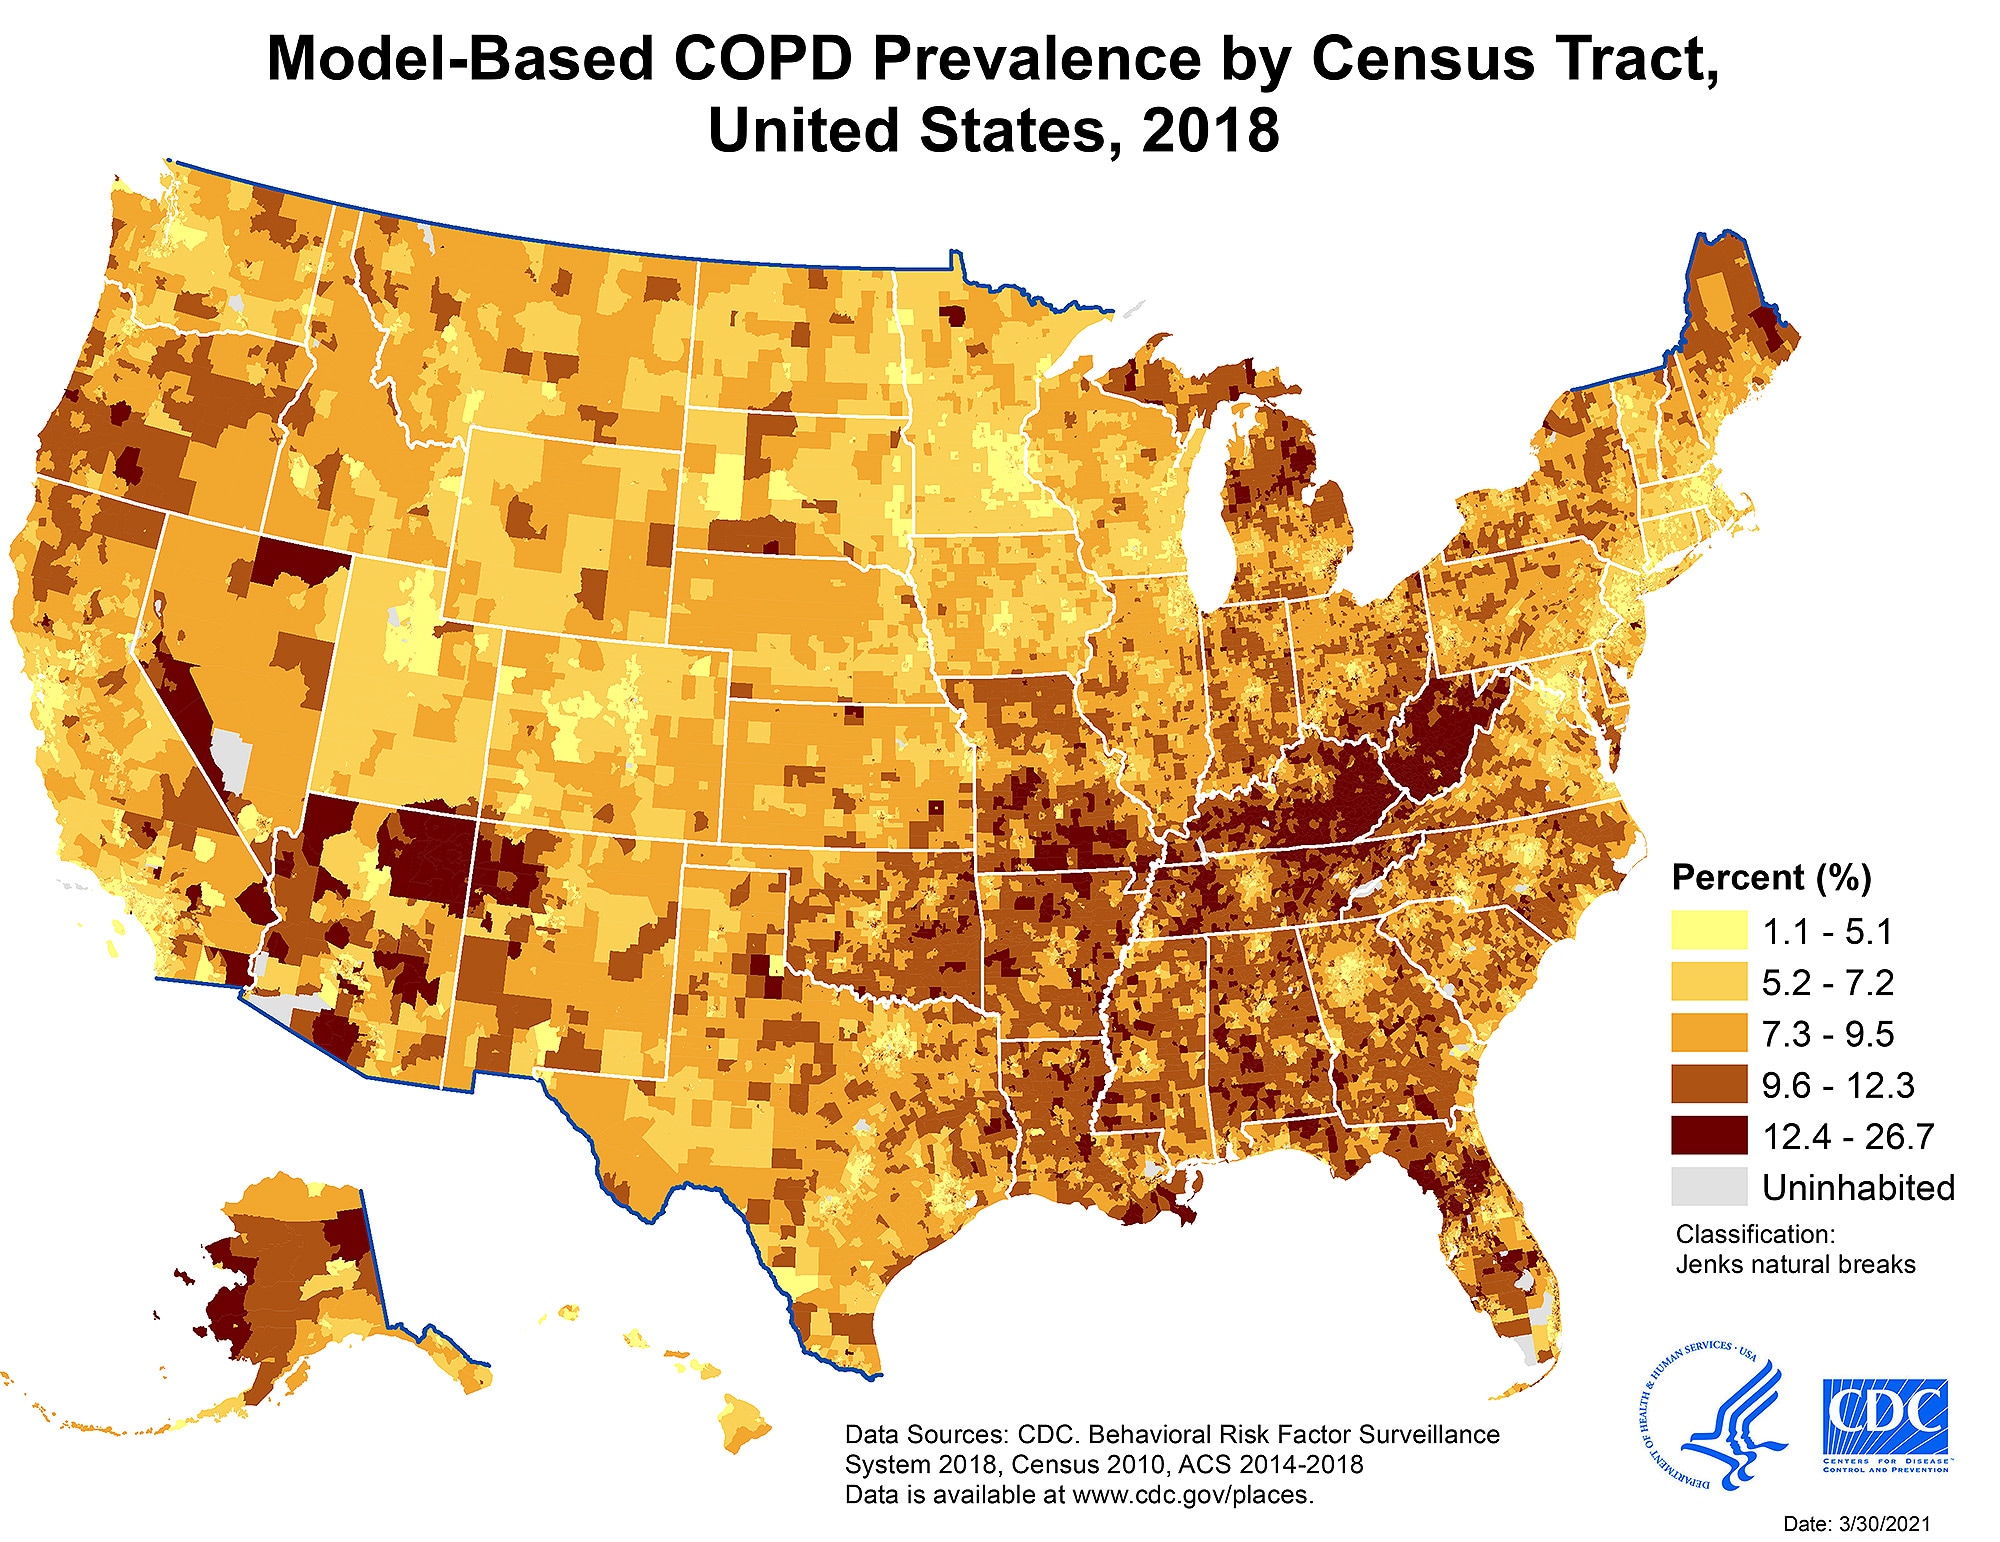 Census tracts with highest model-based COPD prevalence estimates were clustered along the Ohio and lower Mississippi rivers